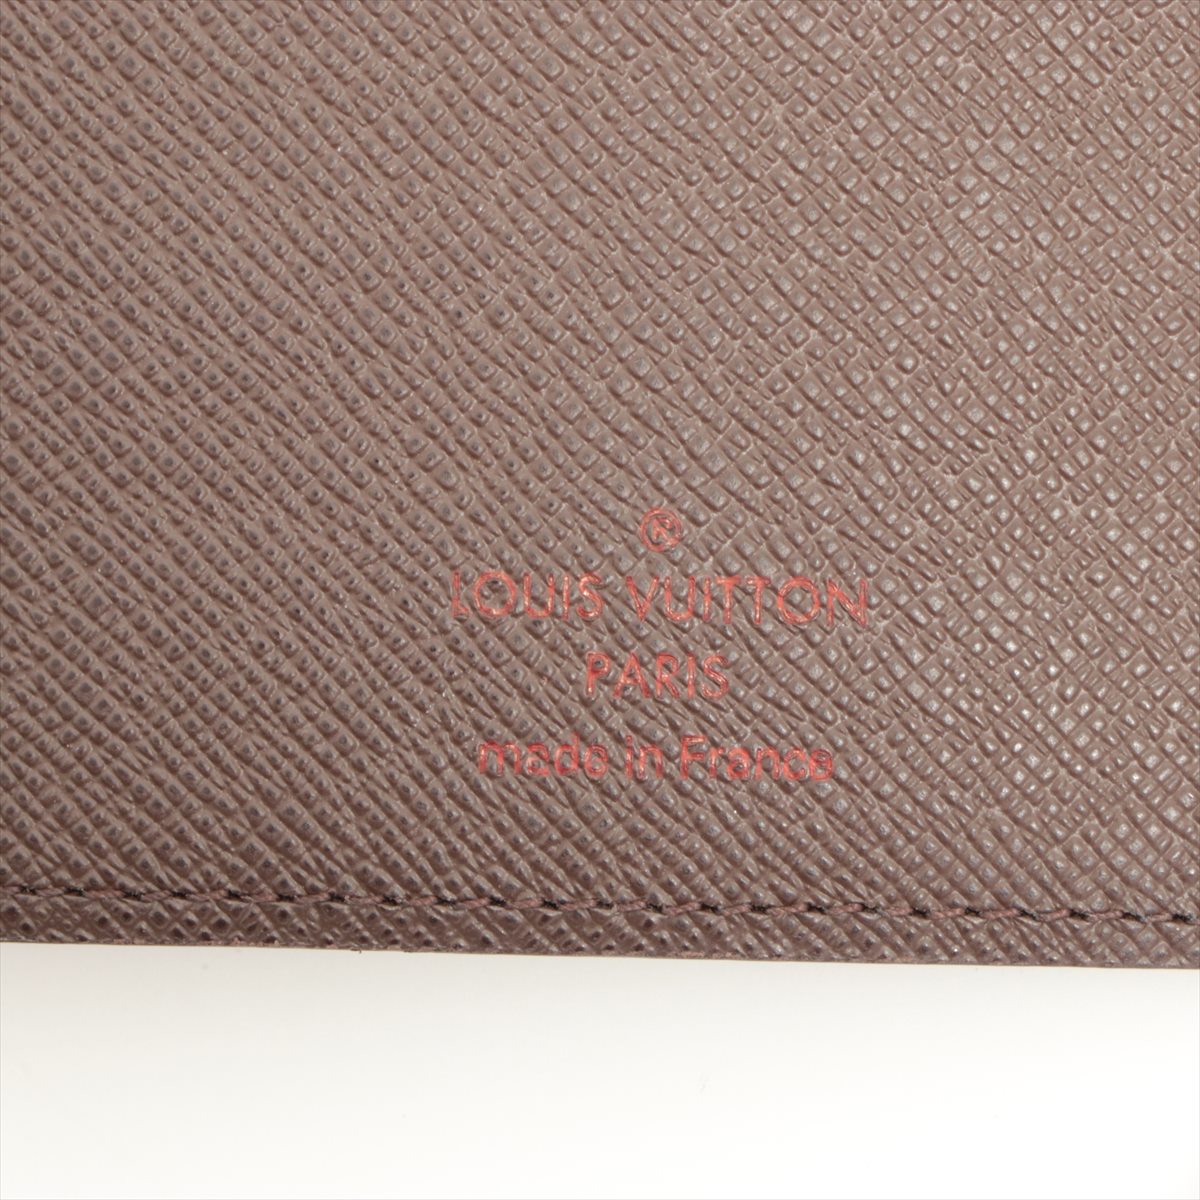 LOUIS VUITTON Agenda Notebook MM in Black Taiga Leather – HOUSE of LUXURY @  Haile